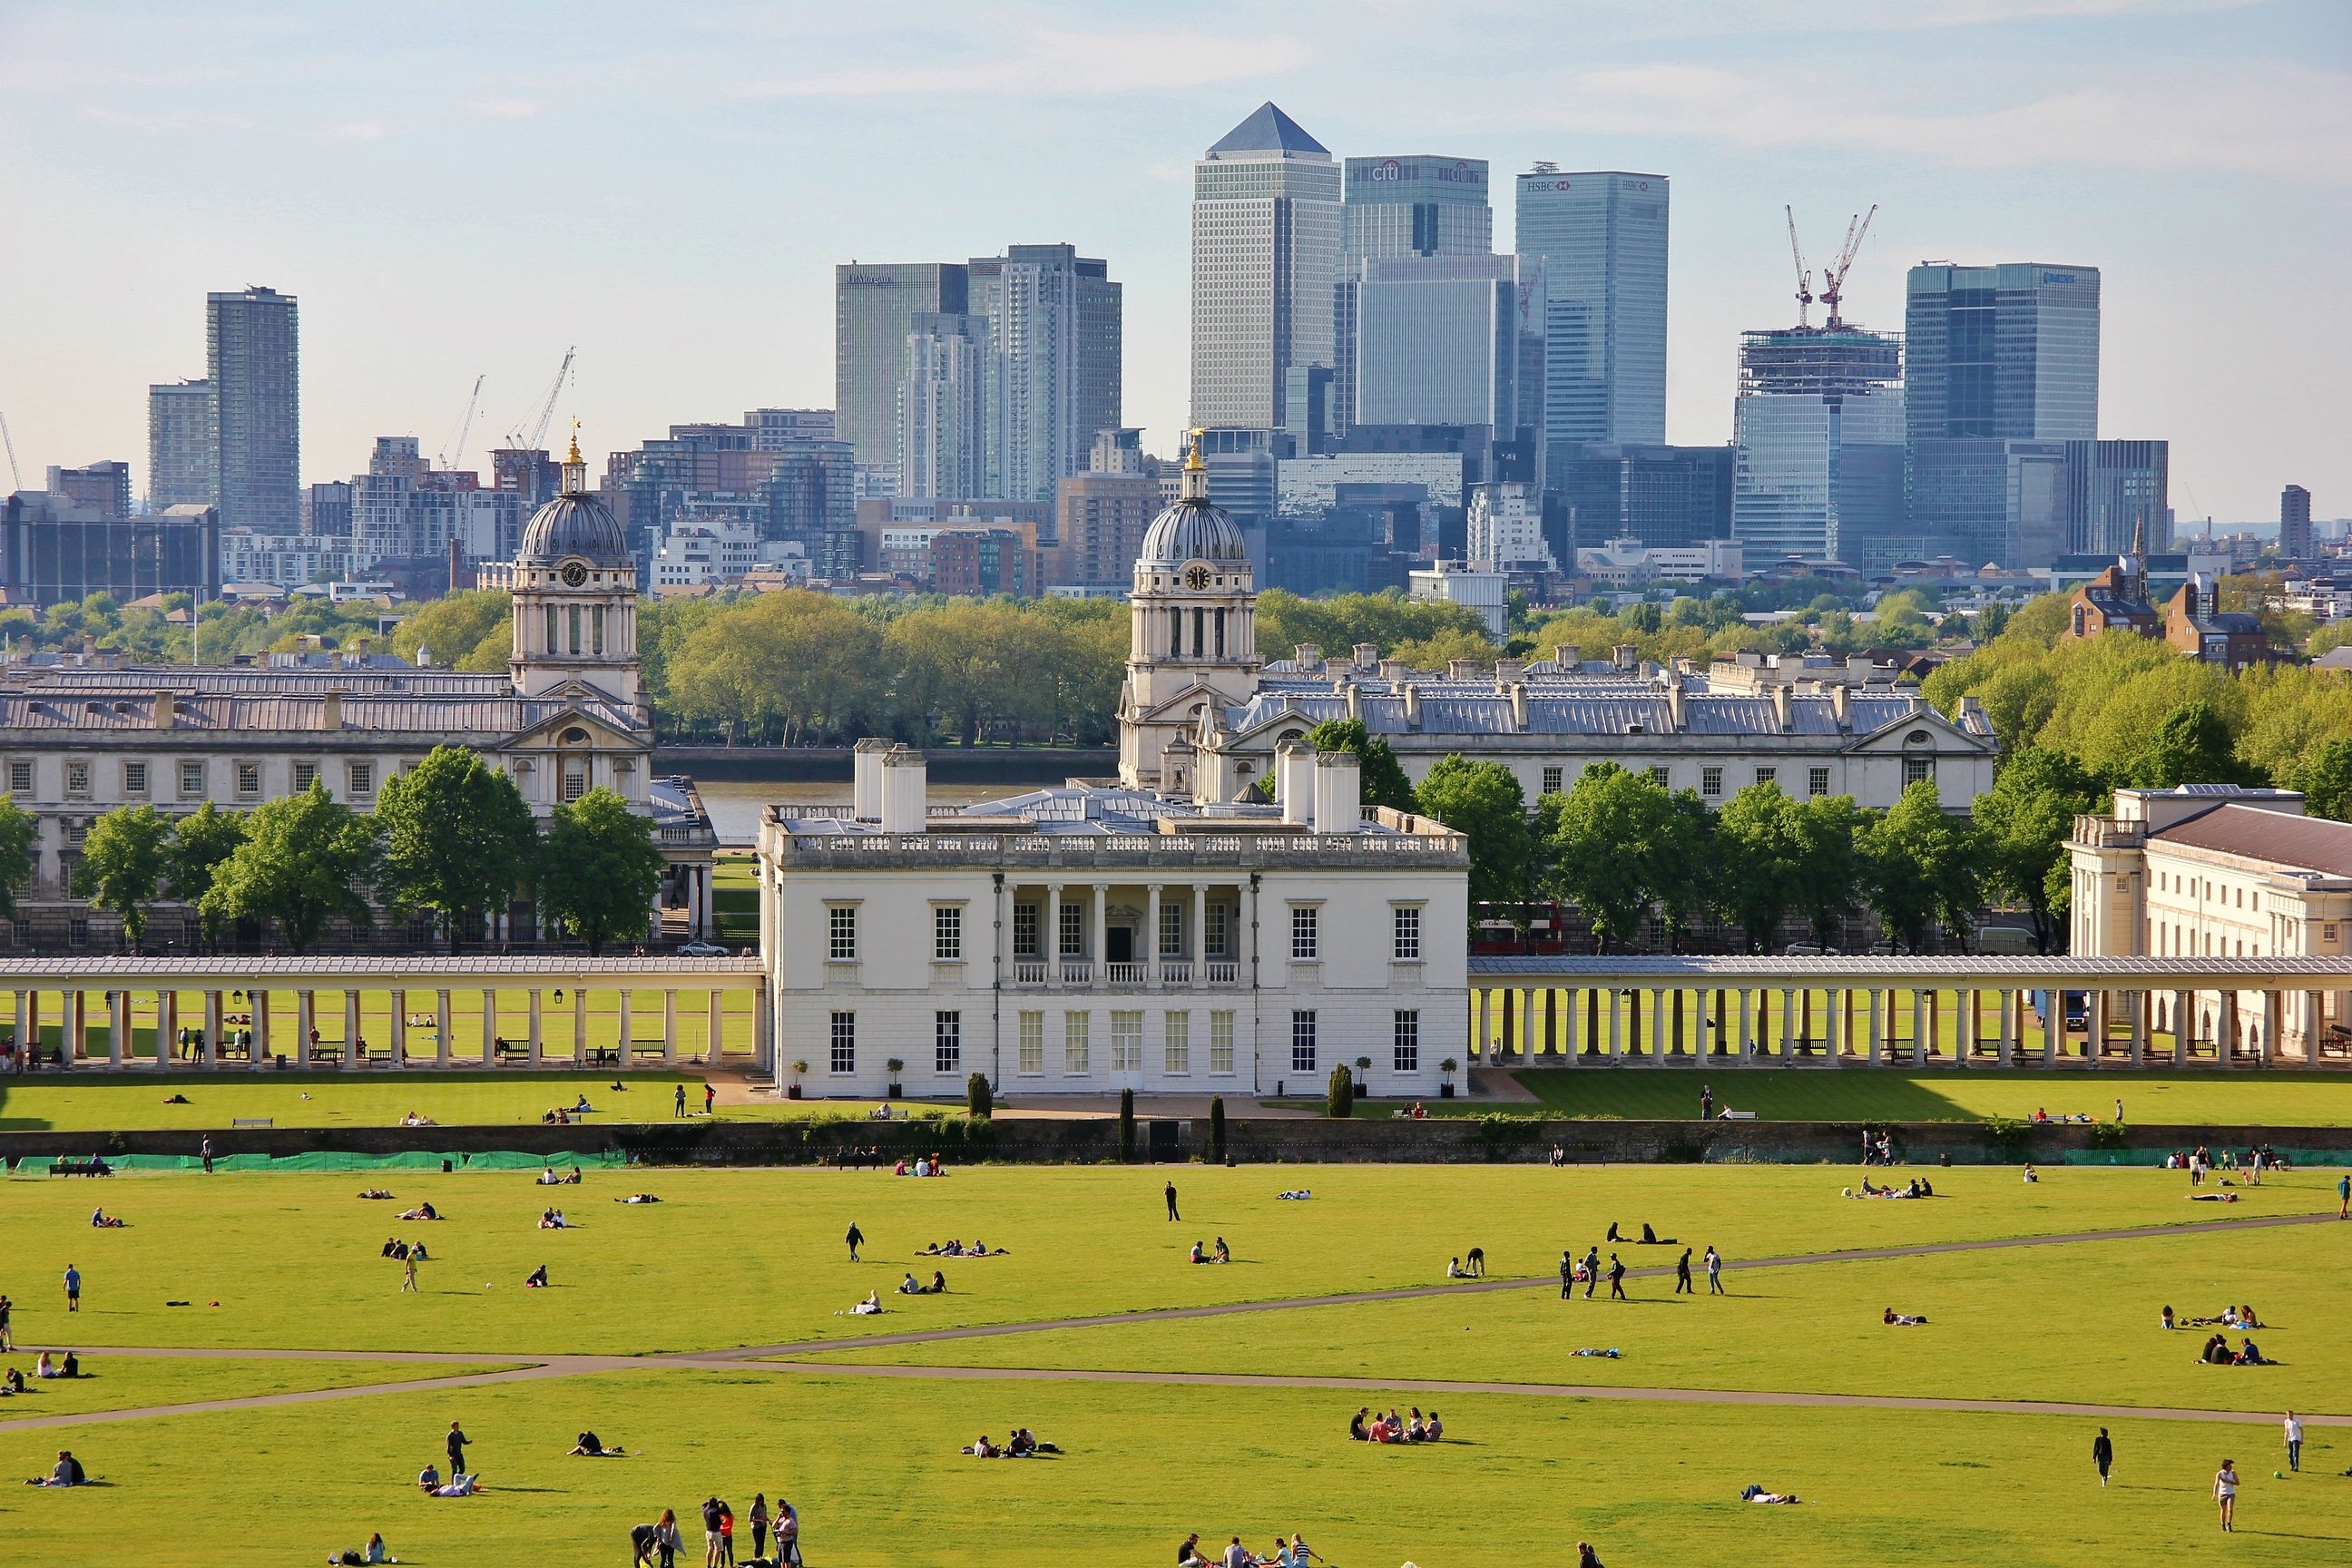 Panoramic view of London from Greenwich Park